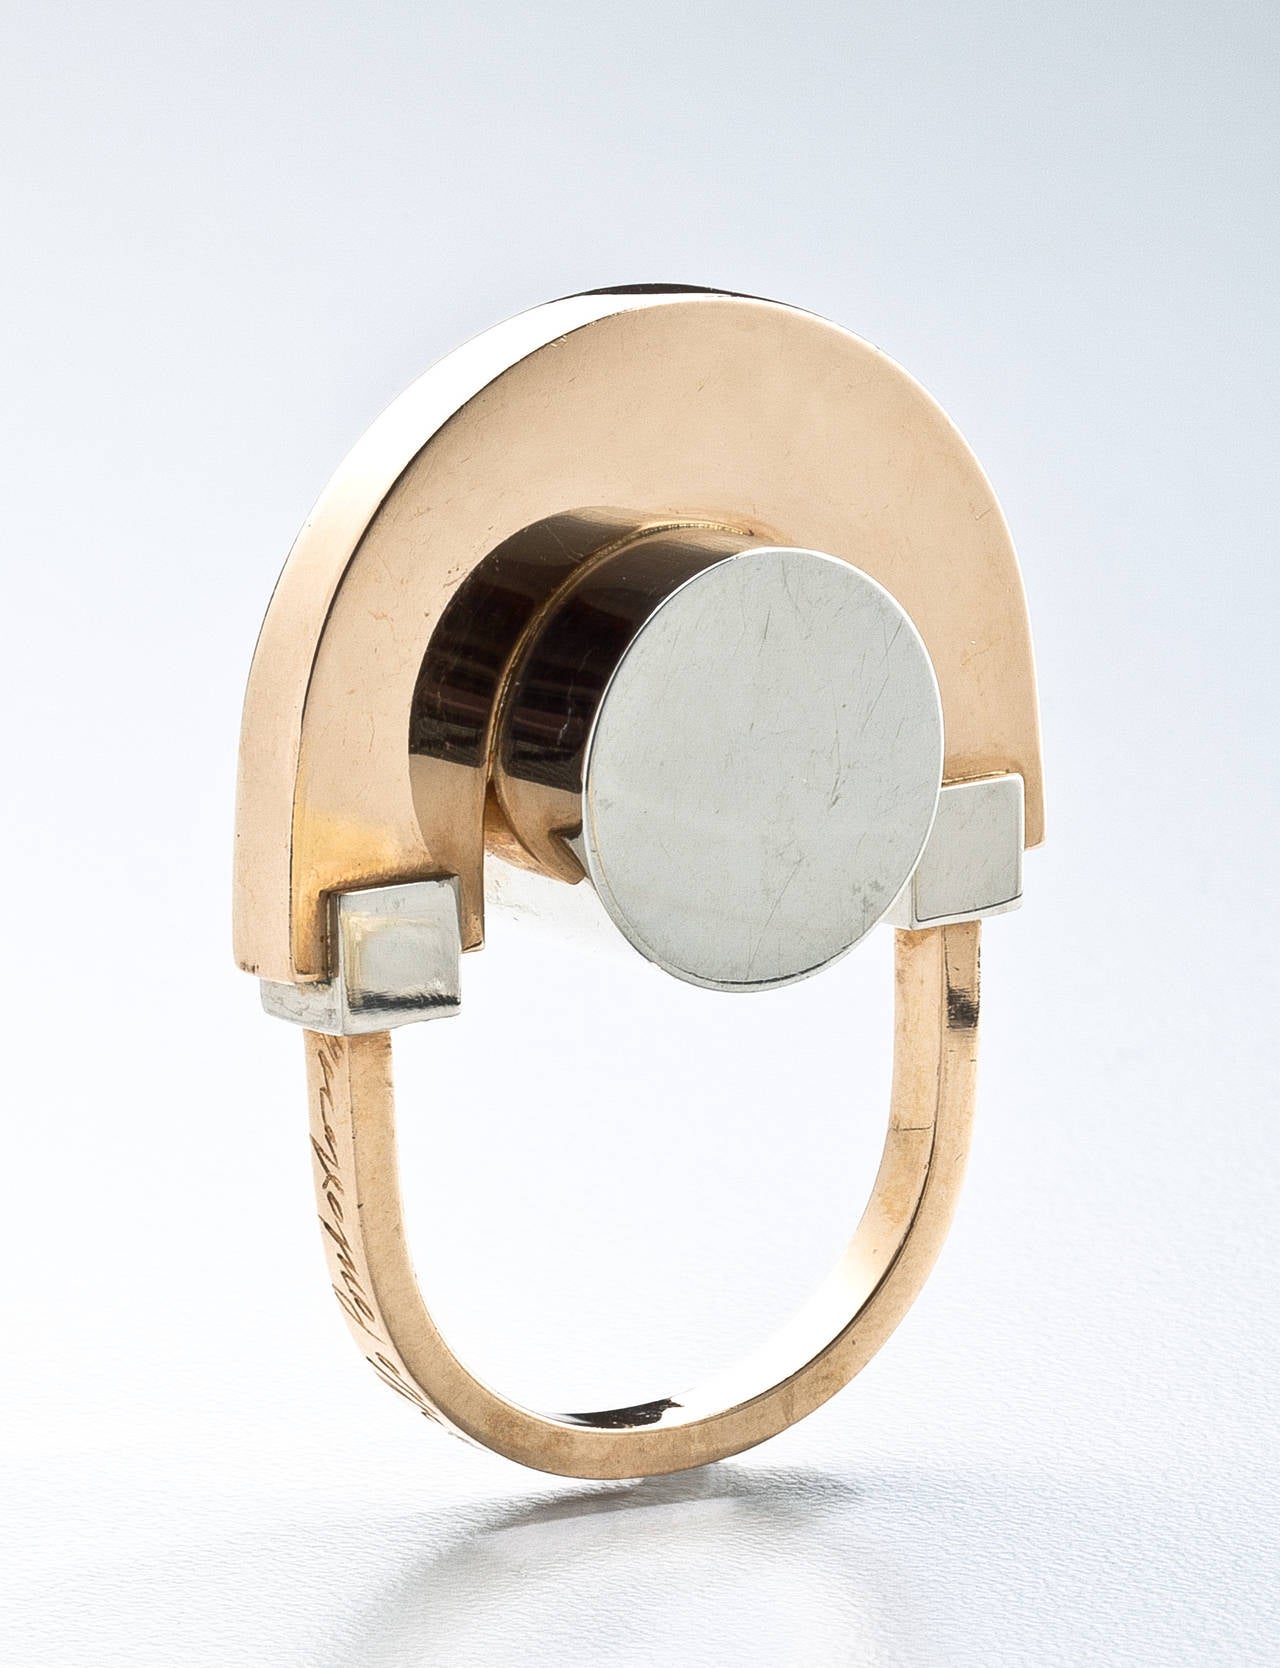 A dynamic abstract ring by the Italian artist, Arnaldo Pomodoro (b.1926) in white and yellow 18 karat gold.   The ring was commissioned from Pomodoro in 1967 as part of the GEM collection of artist's jewelry executed in Milan, Italy.  This example